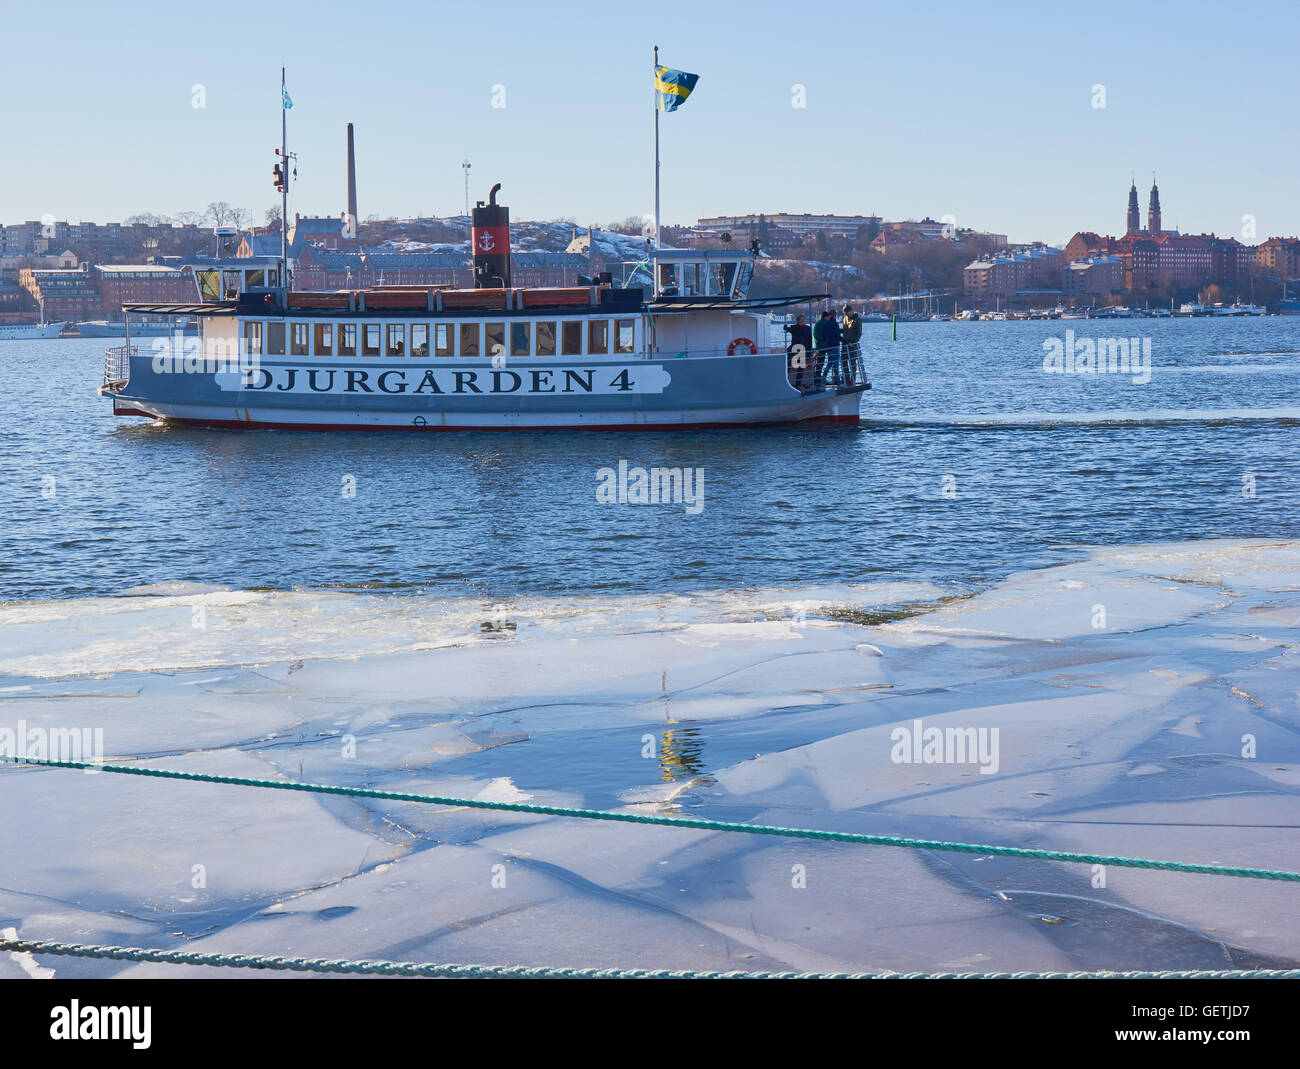 Winter scene with sheets of ice and Djurgarden ferry Stockholm Sweden Scandinavia Stock Photo